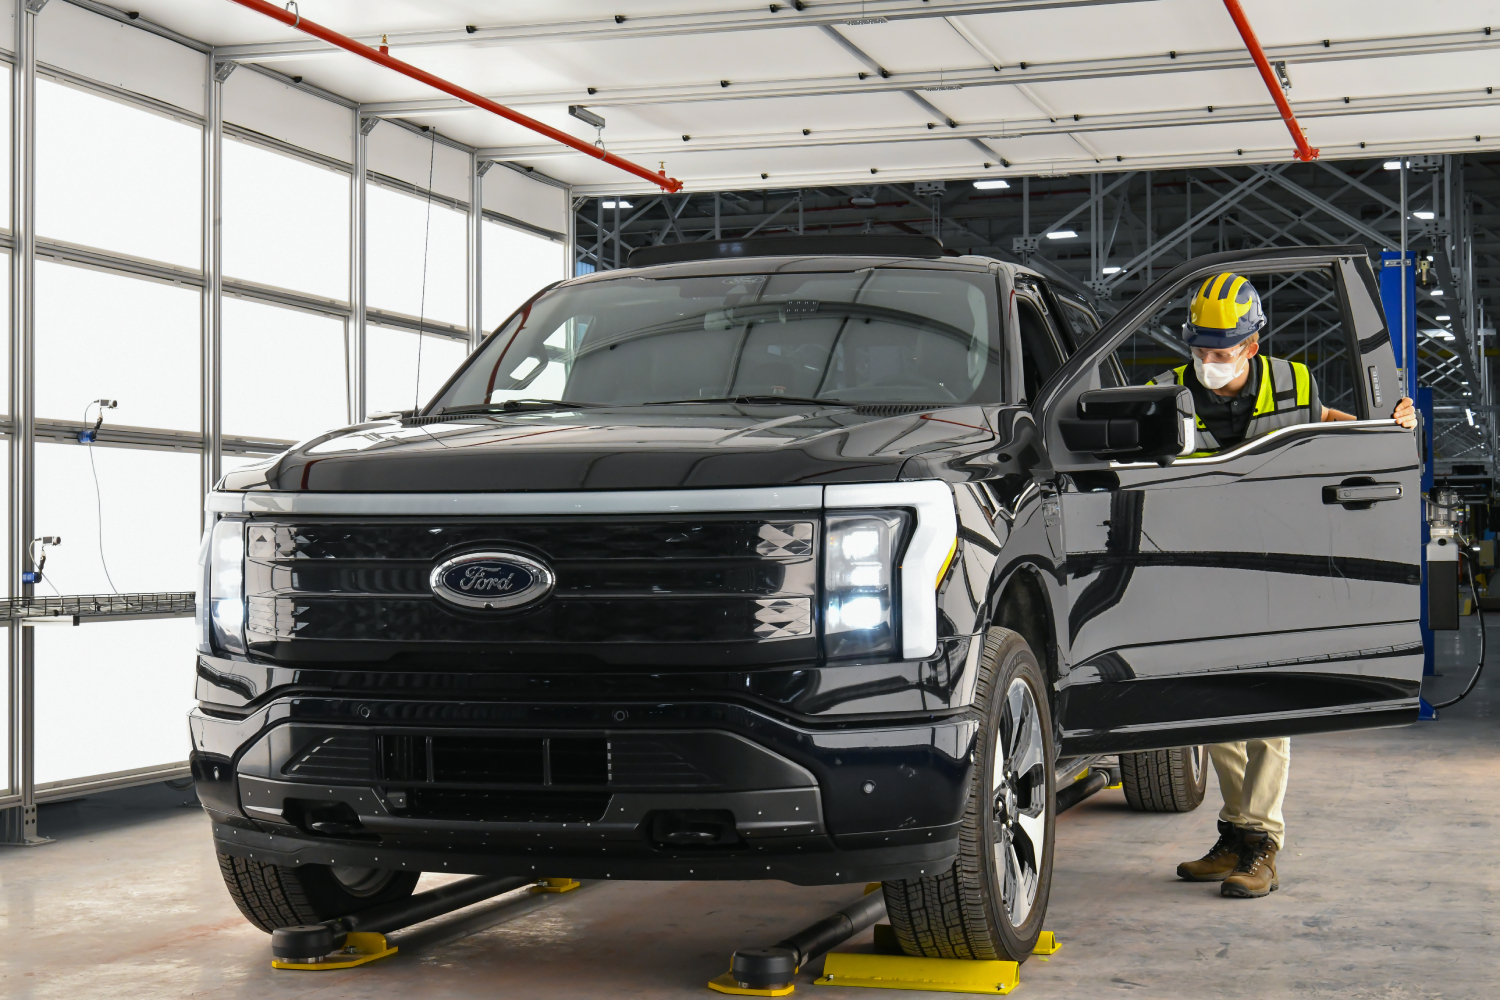 A Ford F-150 Lightning in production of which Linda Zhang helped design